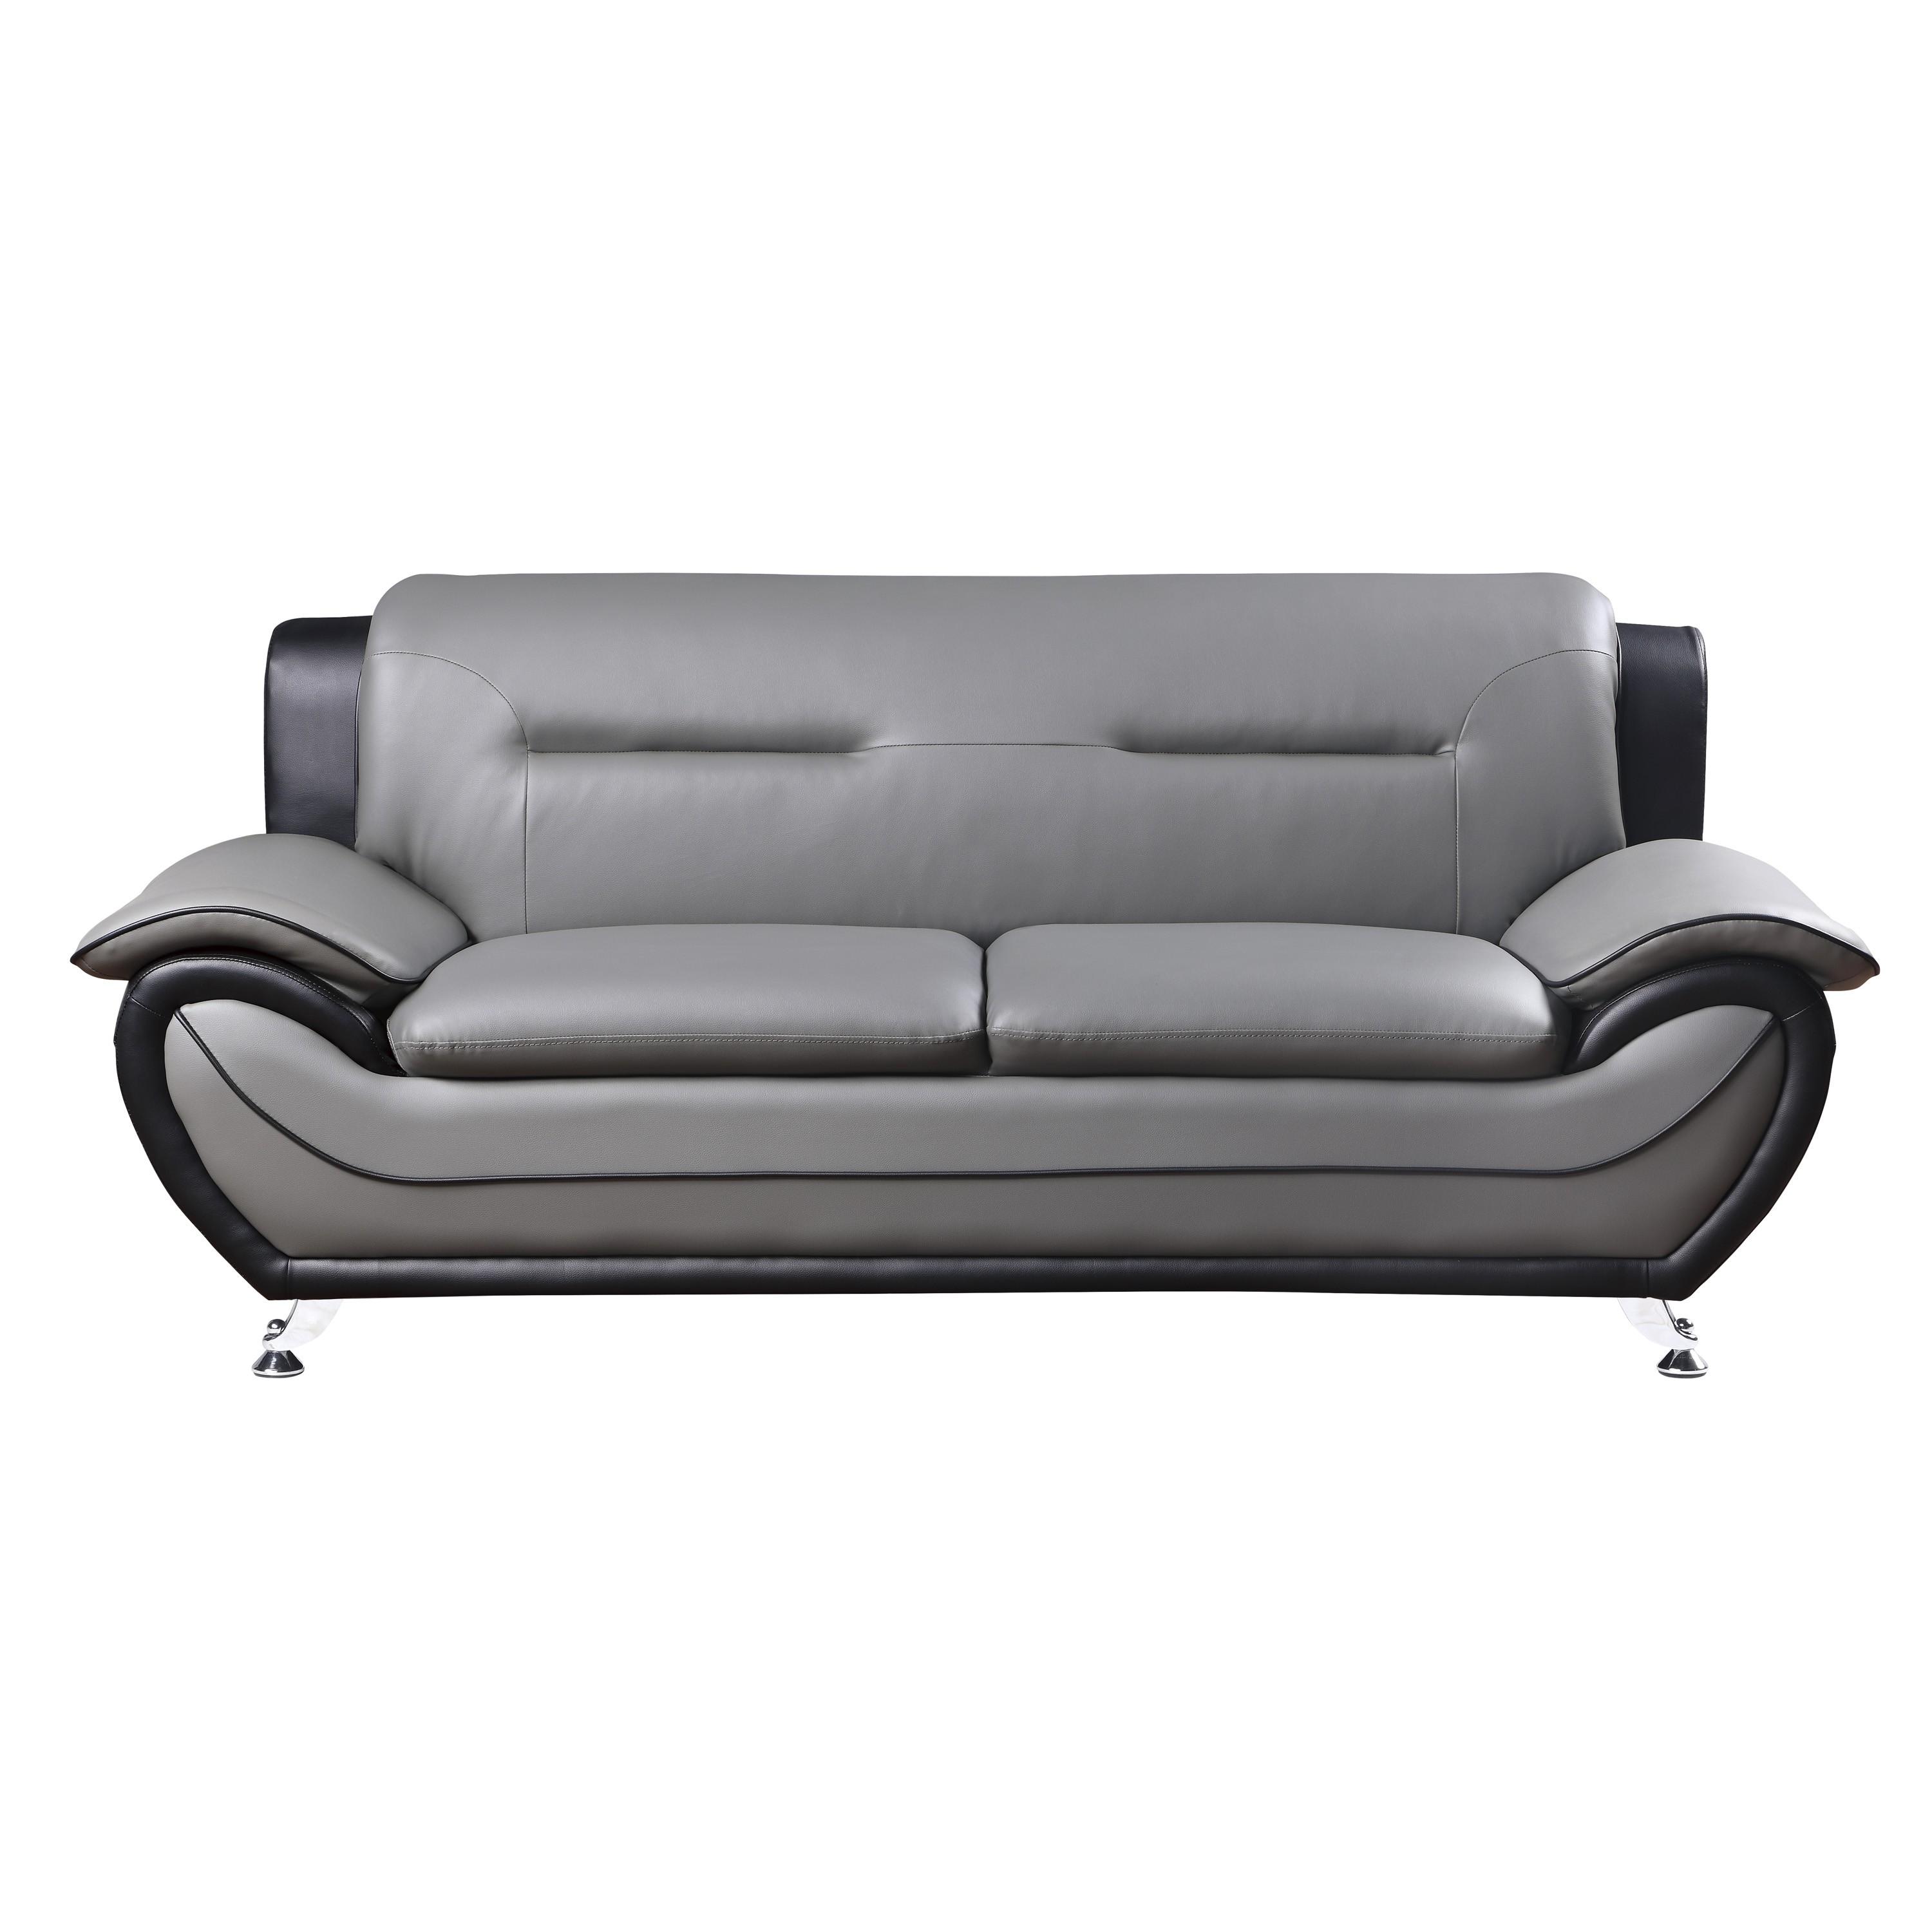 Contemporary Sofa 9419-3 Matteo 9419-3 in Gray Faux Leather